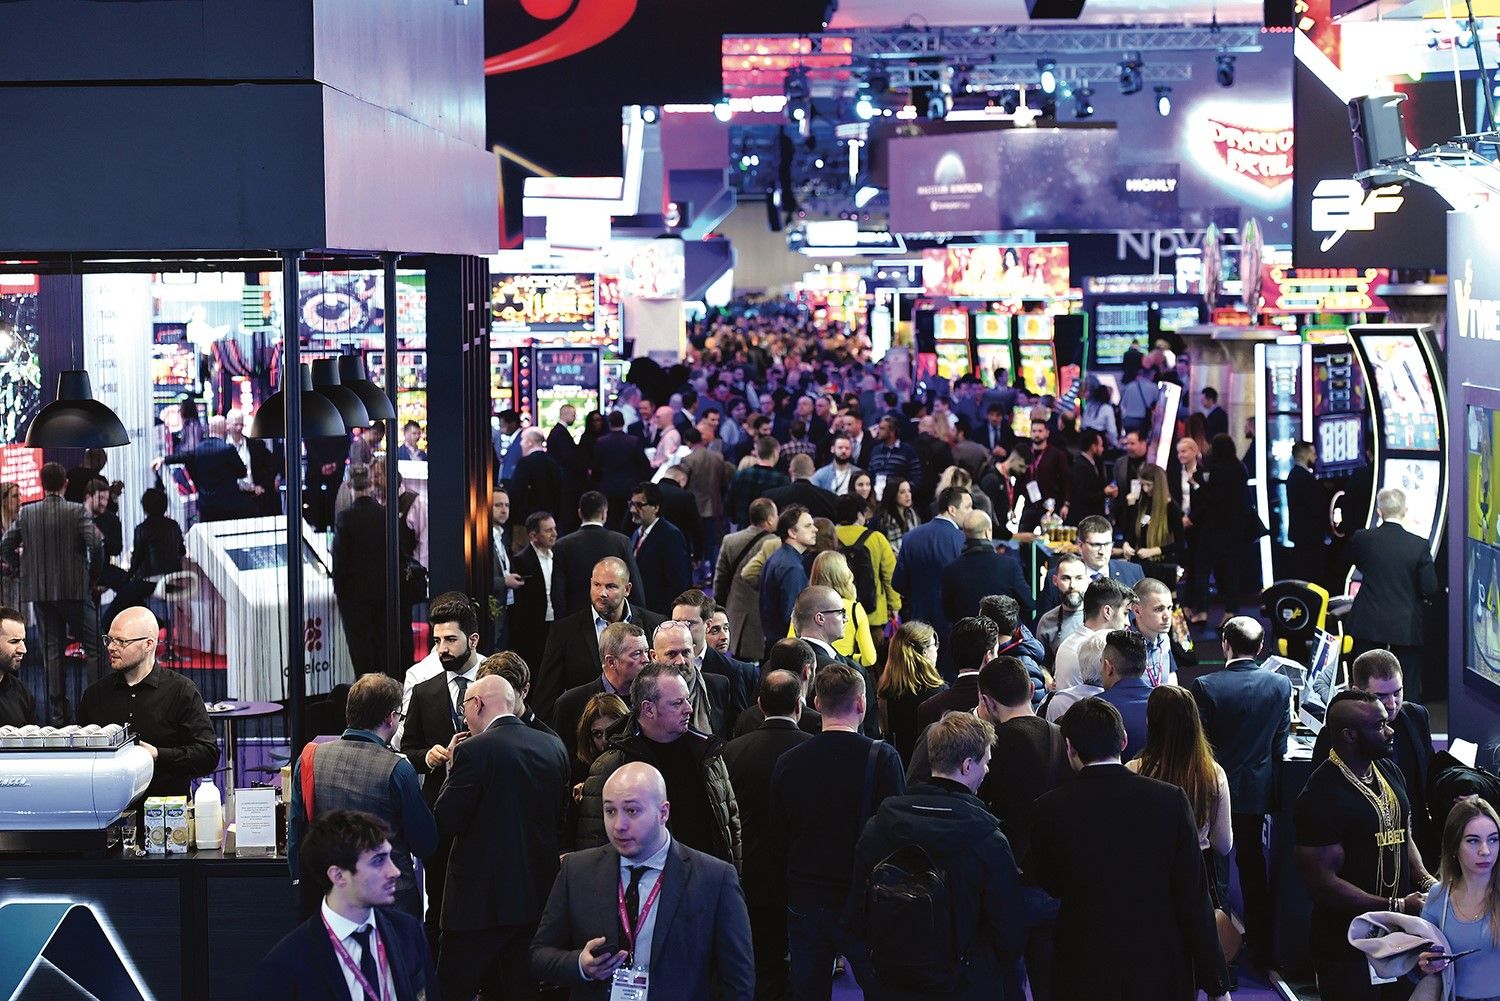 ICE 2023 will be the biggest on record as international games creators and innovators book their presence in London